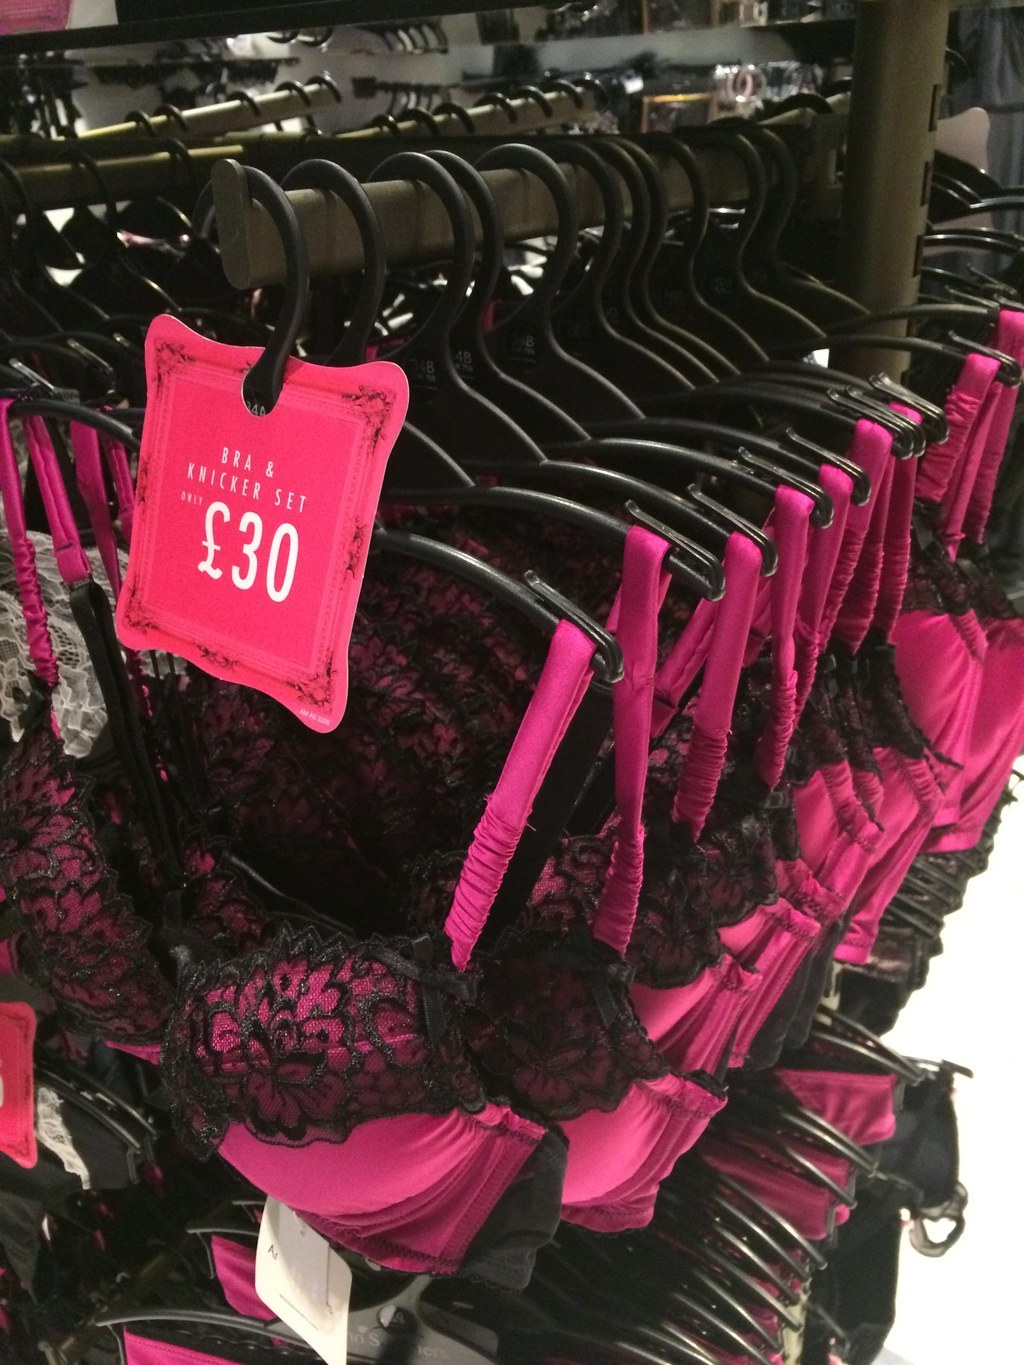 19 Honest Confessions From An Ann Summers Worker